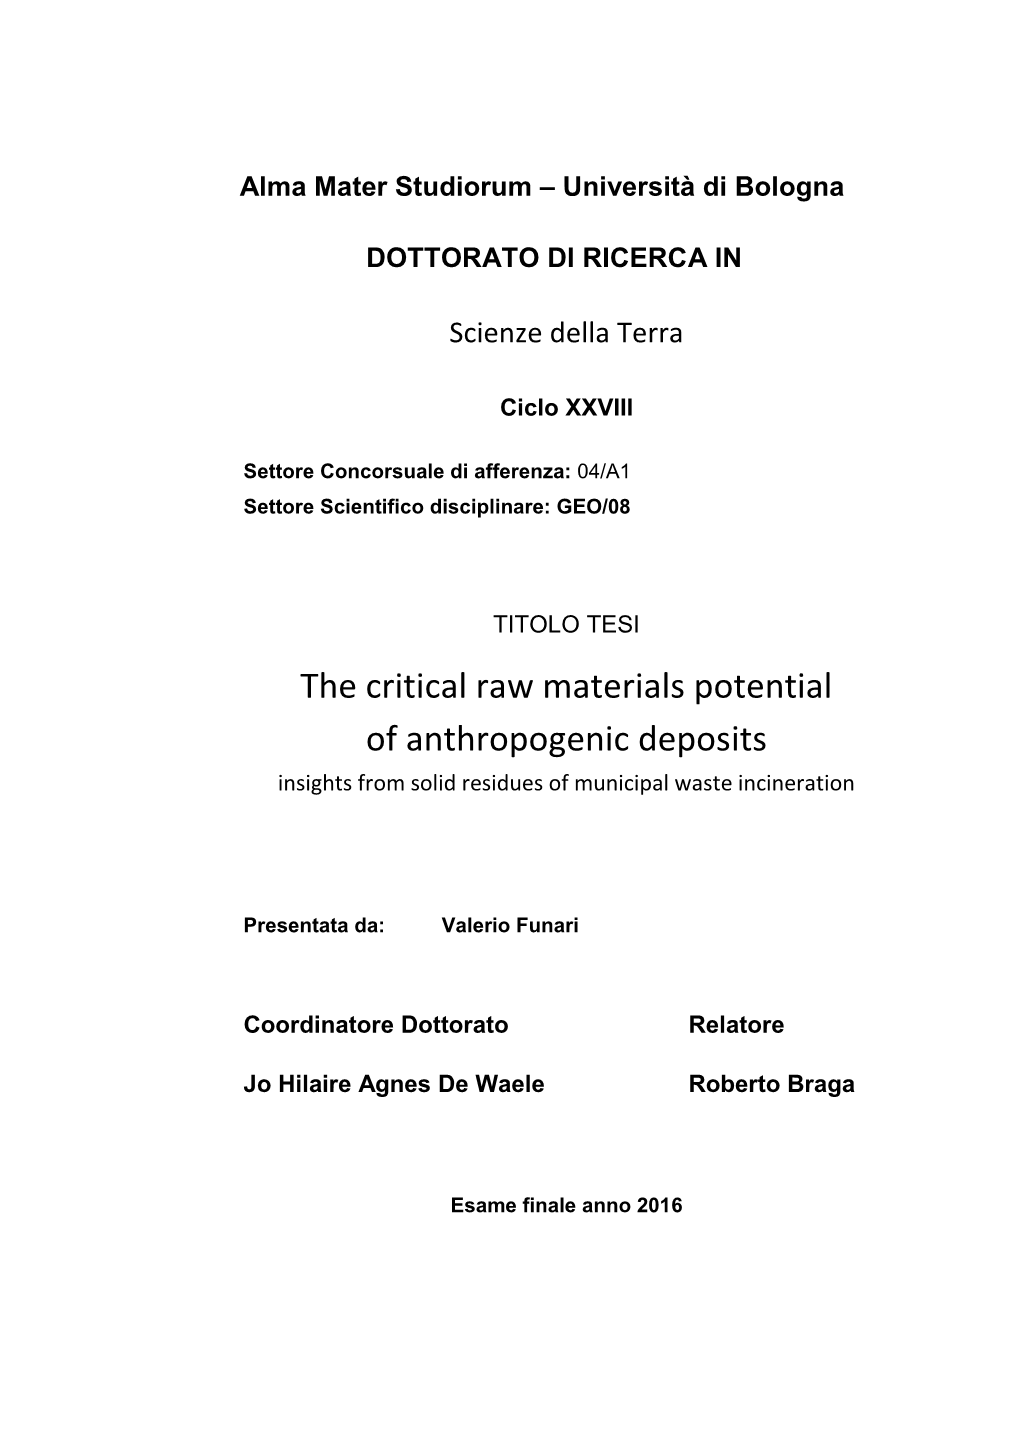 The Critical Raw Materials Potential of Anthropogenic Deposits Insights from Solid Residues of Municipal Waste Incineration